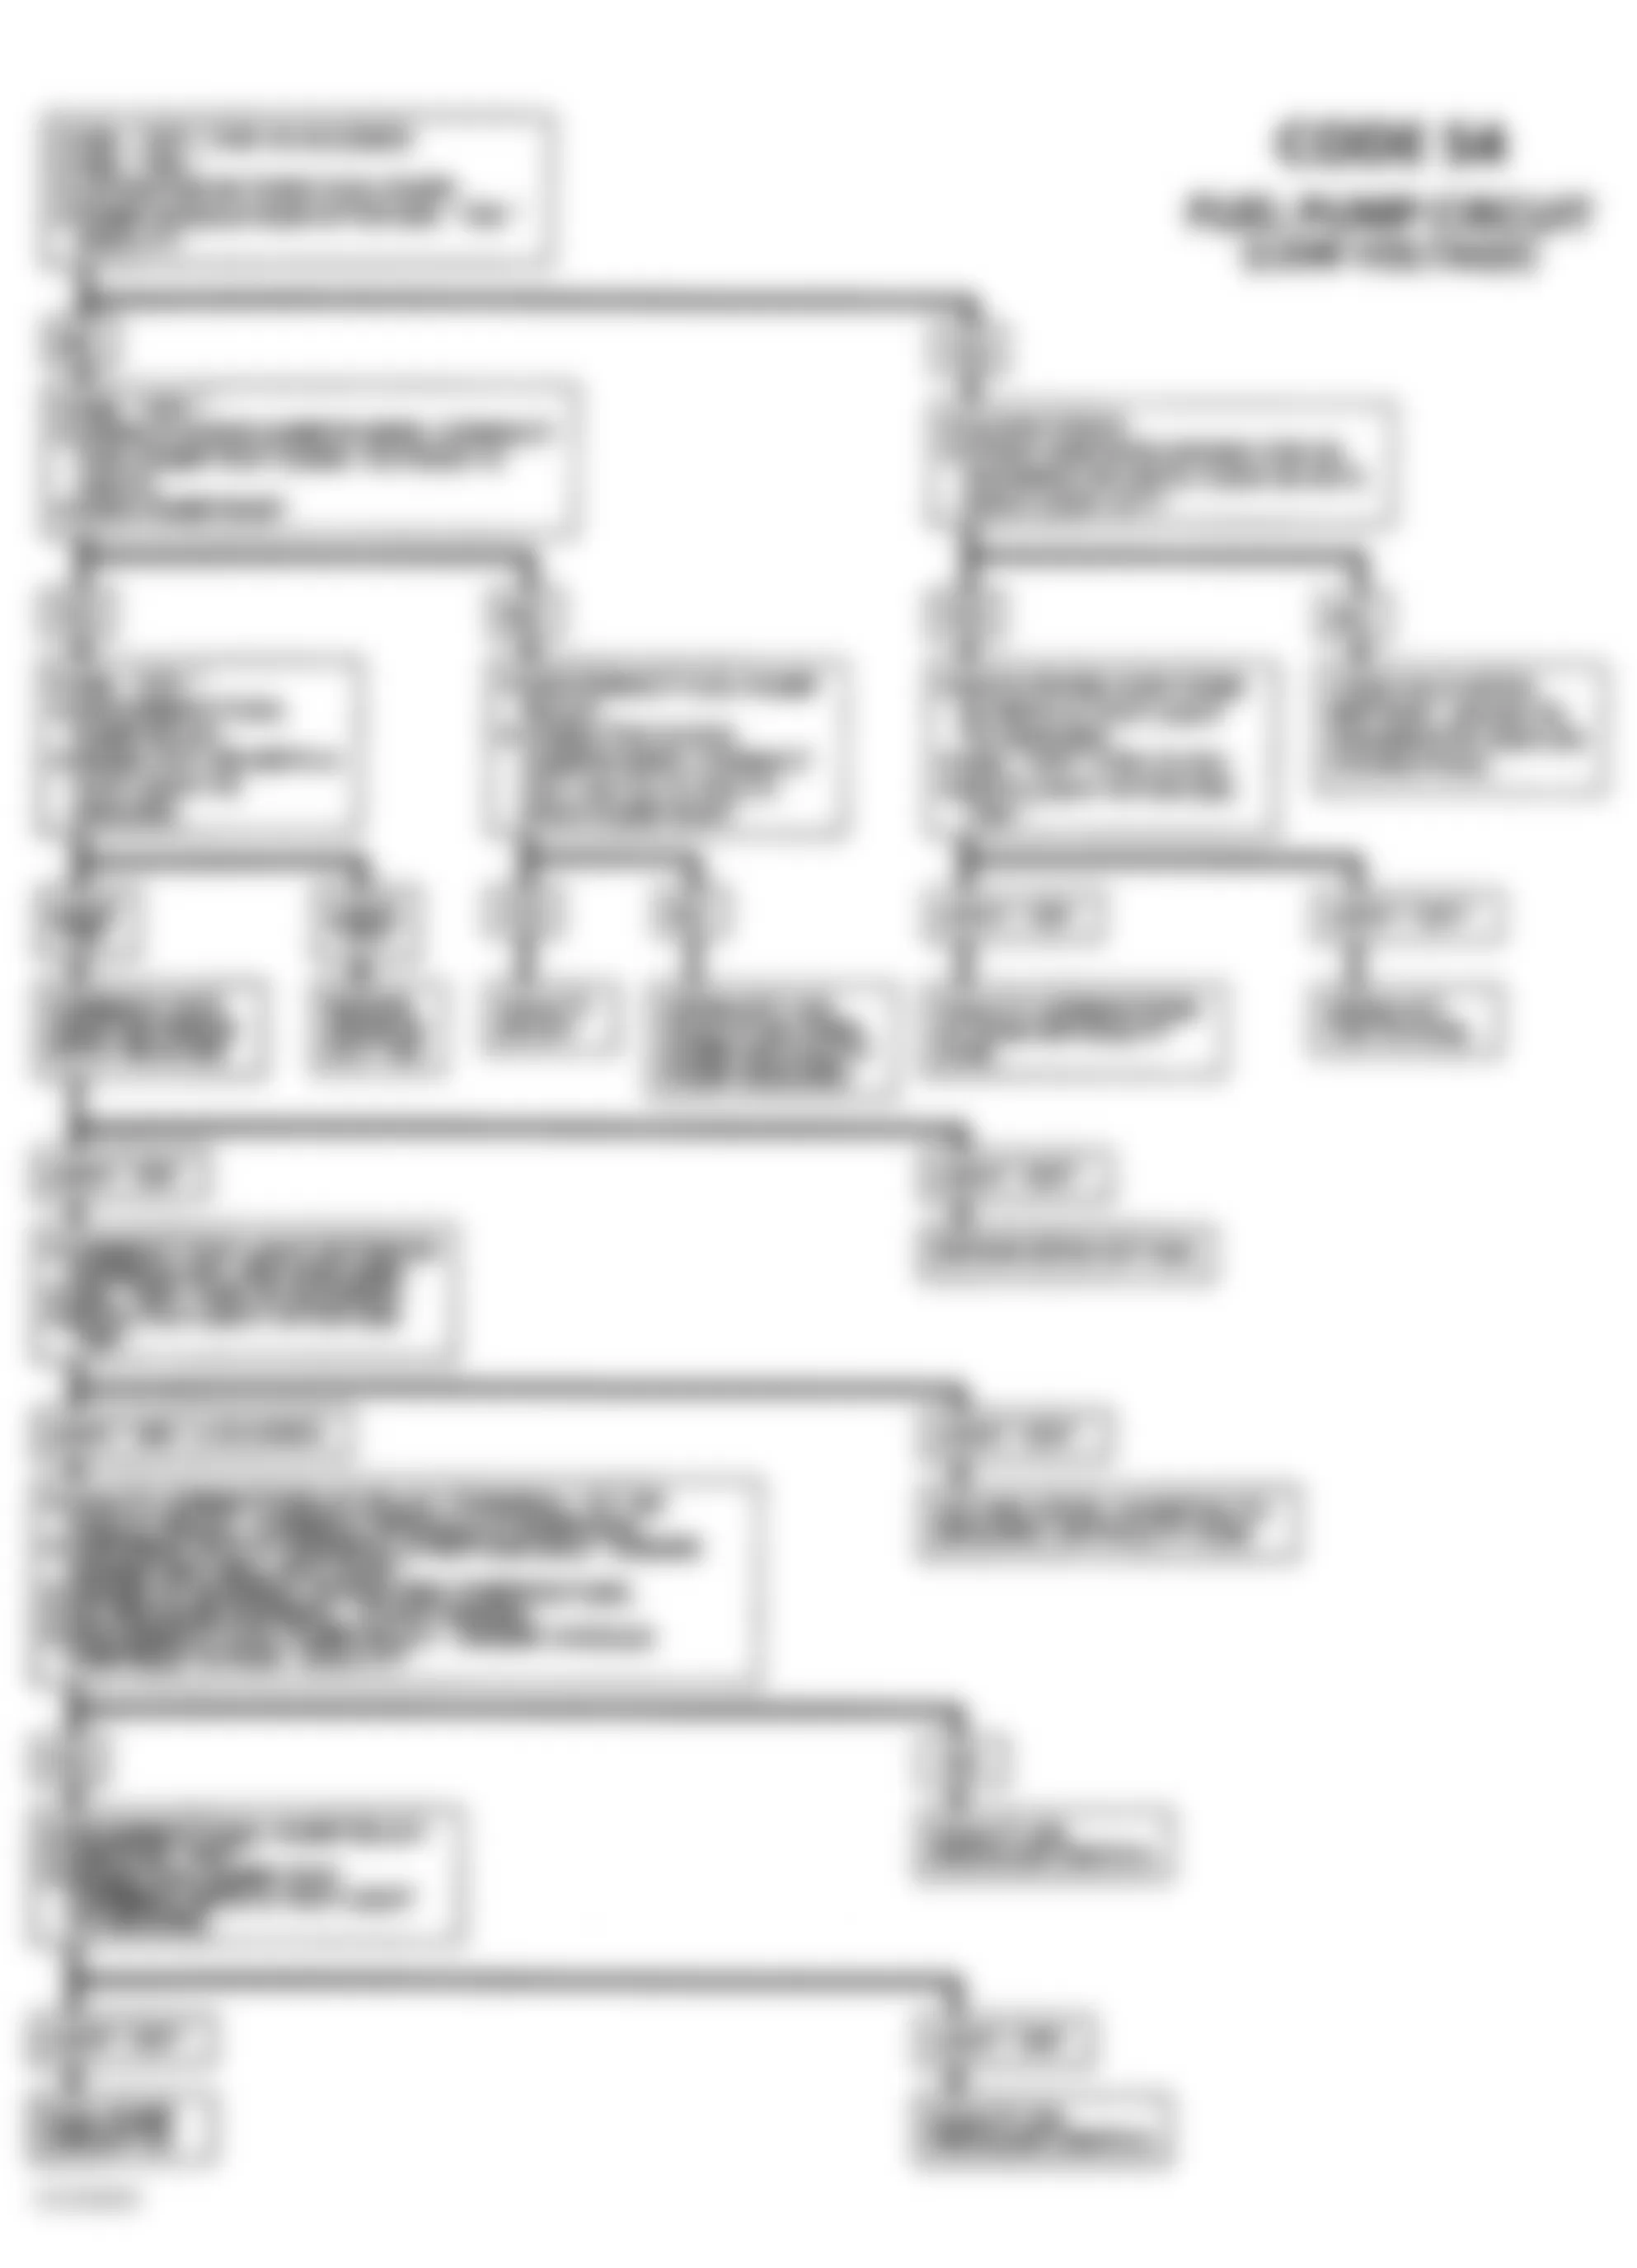 GMC Sonoma 1991 - Component Locations -  Code 54 Diagnostic Flow Chart (S & T Series Only)